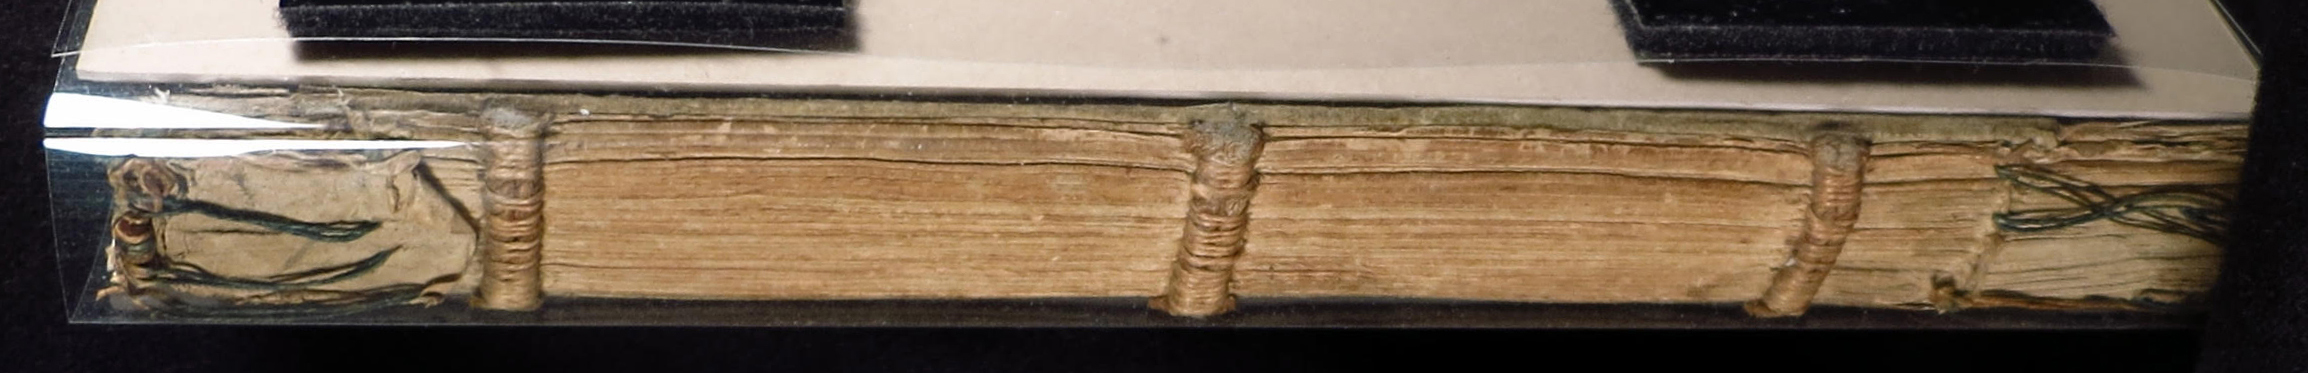 Smeltzer Collection, Henri de Suberville (1598), Spine View, with 3 Raised Bands flanked by a Row of Kettle-Stitching at either end.